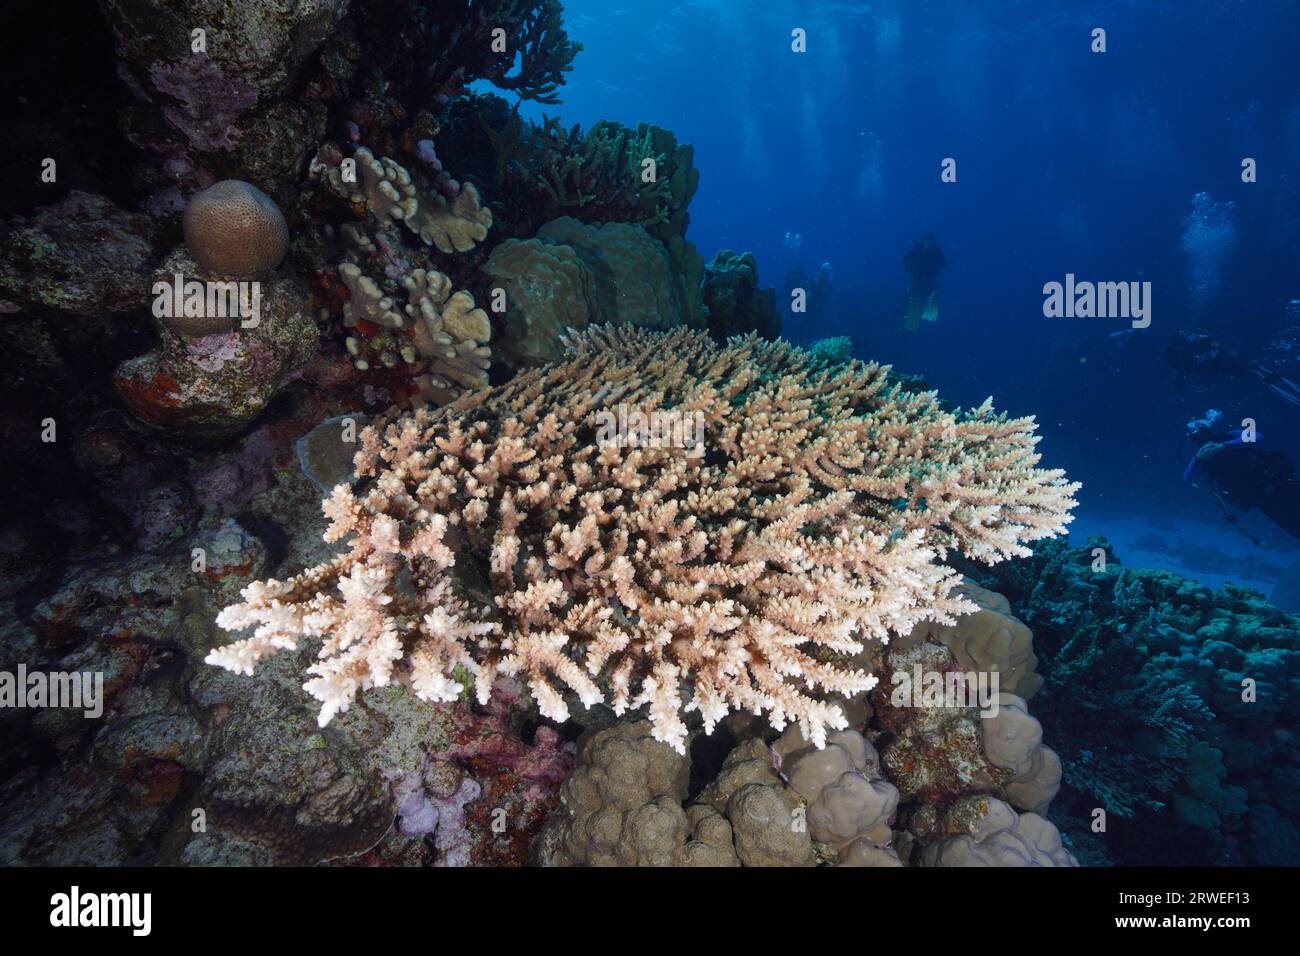 Staghorn coral (Acropora), diver in the background, Small Abu Reef dive site, Fury Shoals, Red Sea, Egypt Stock Photo